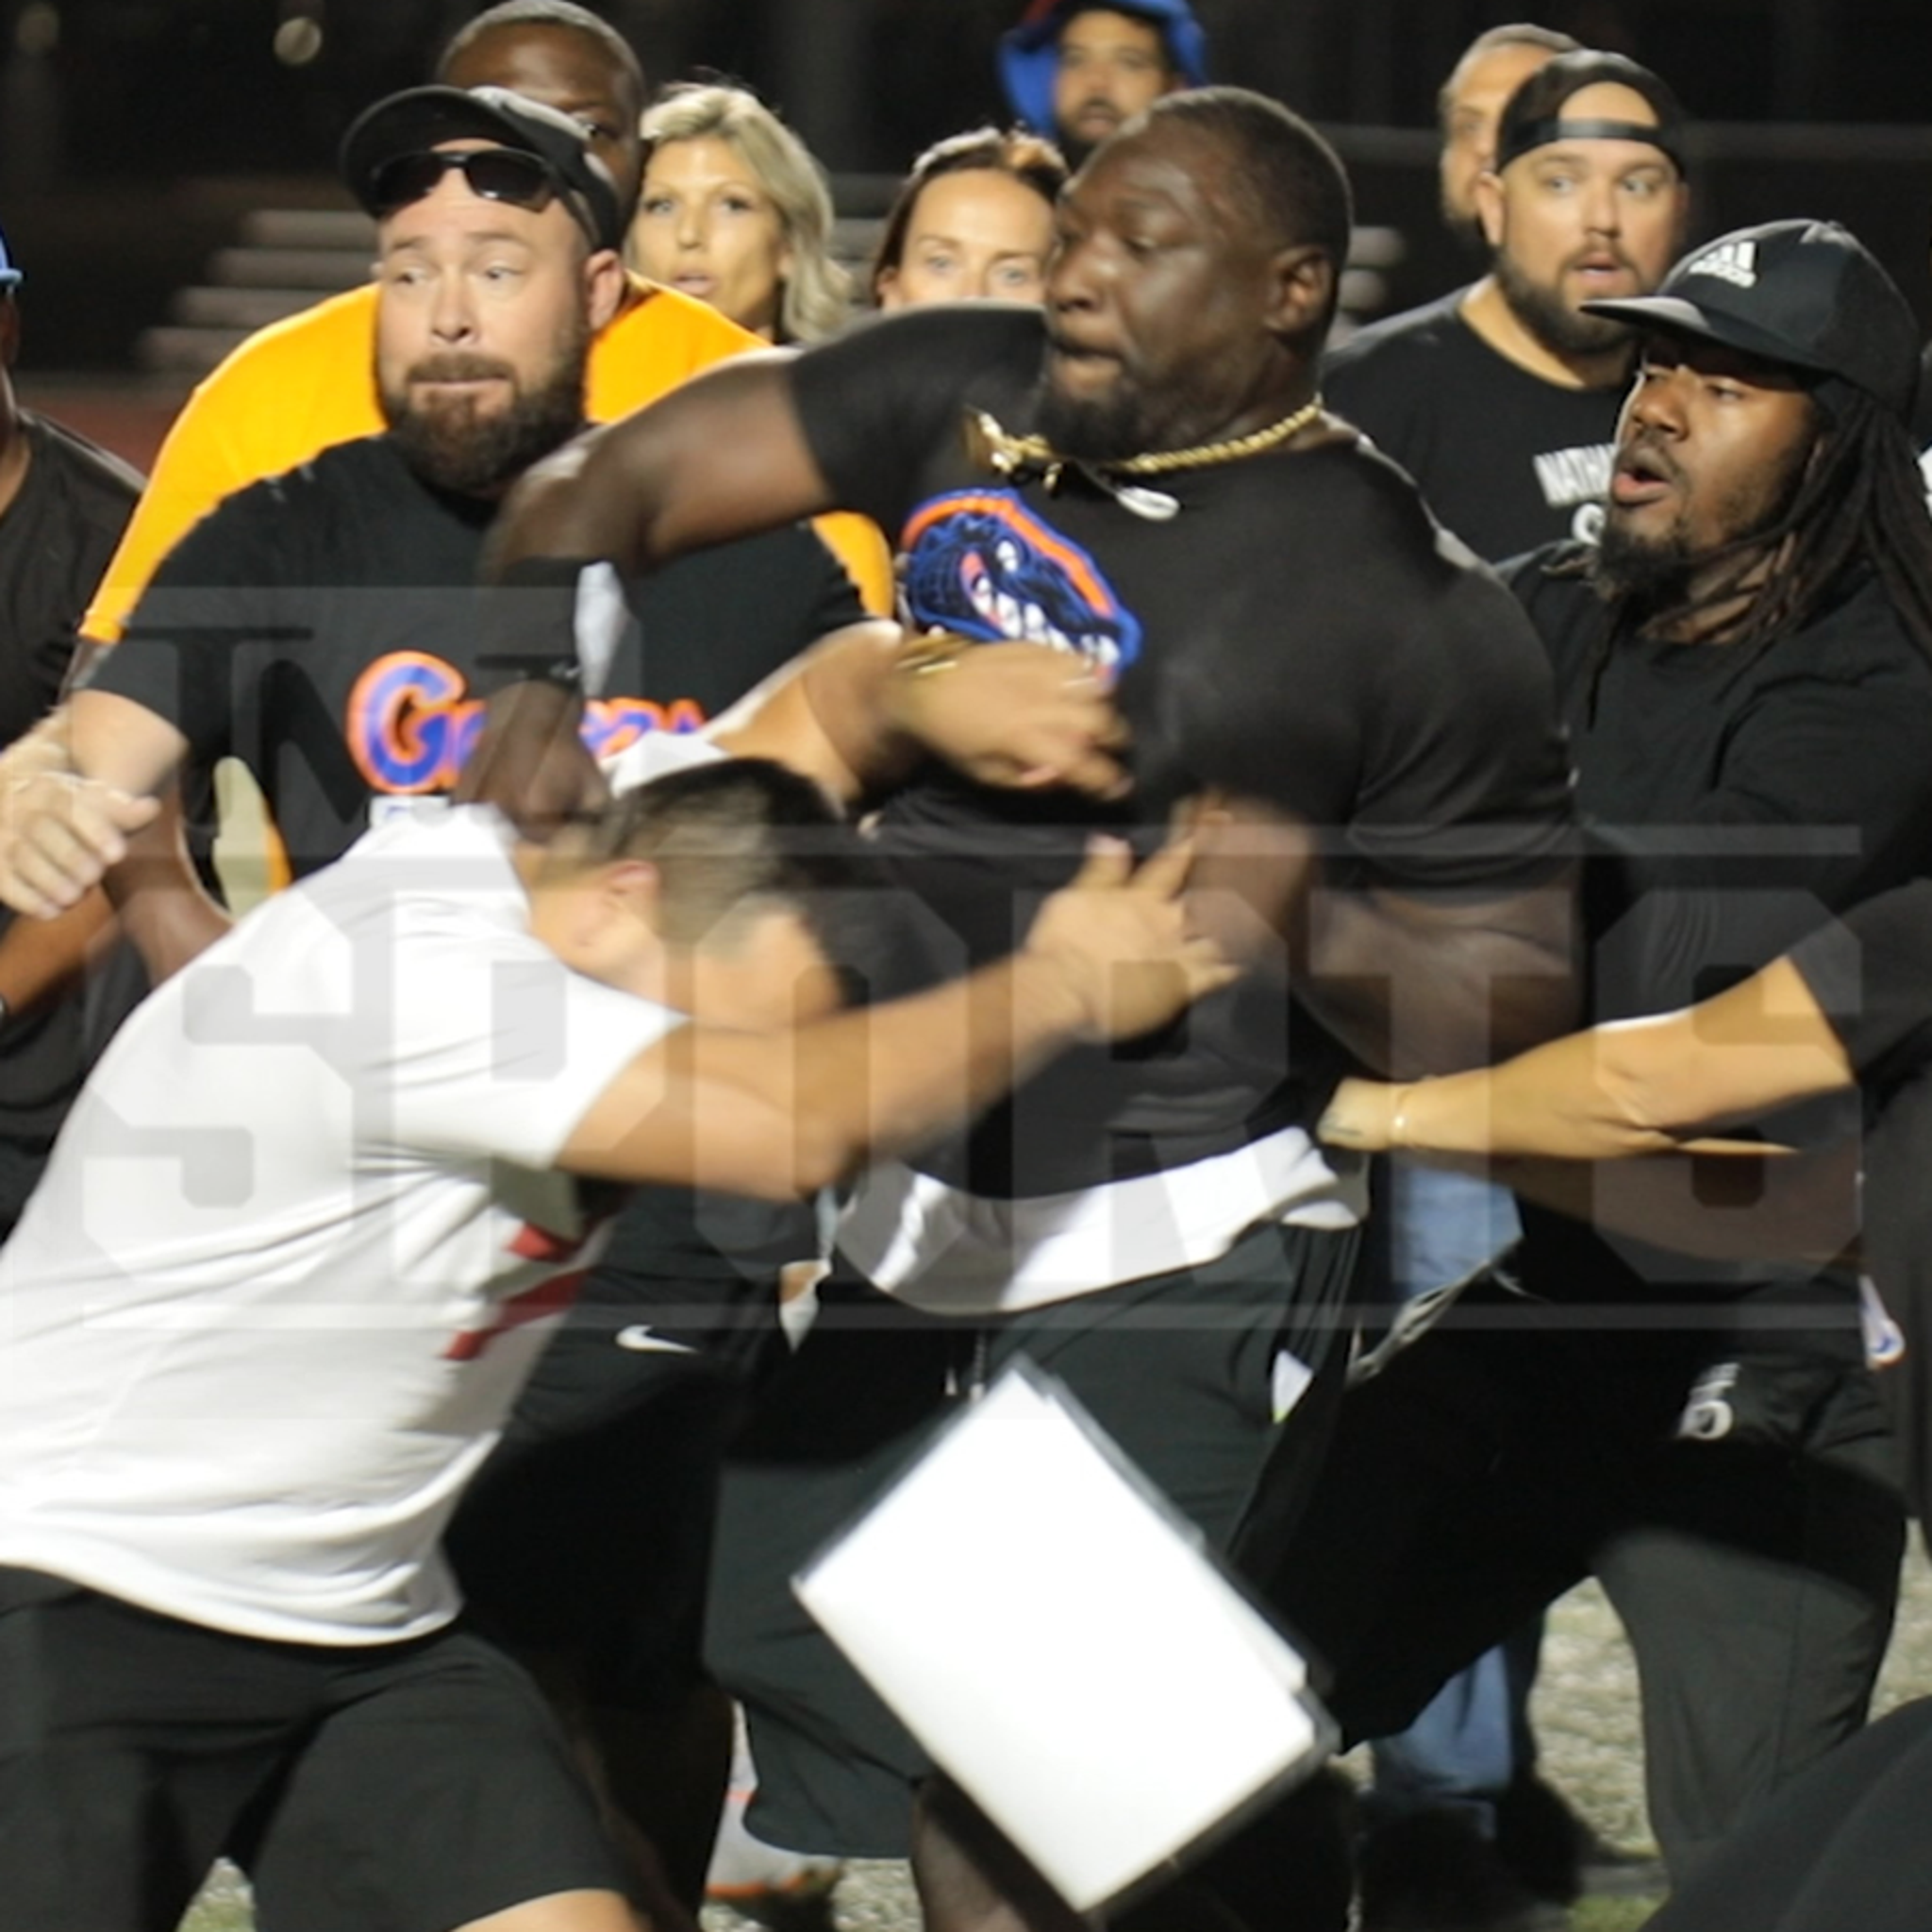 LeGarrette Blount Throws Punches In Fight At Youth Football Game, Cops Investigating - TMZ (Picture 2)